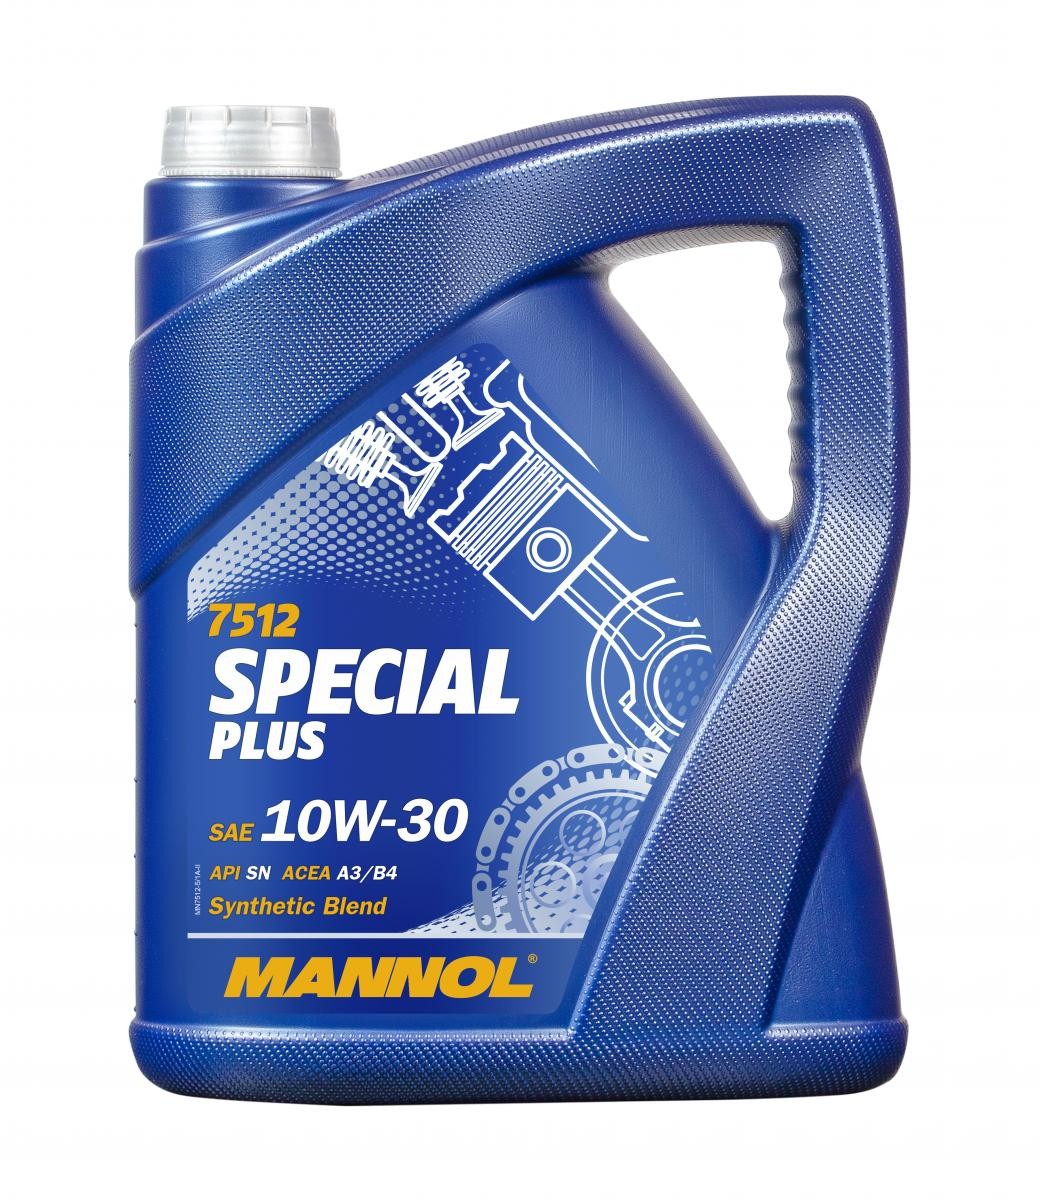 10W-30, 5l, Part Synthetic Oil from MANNOL - MN7512-5